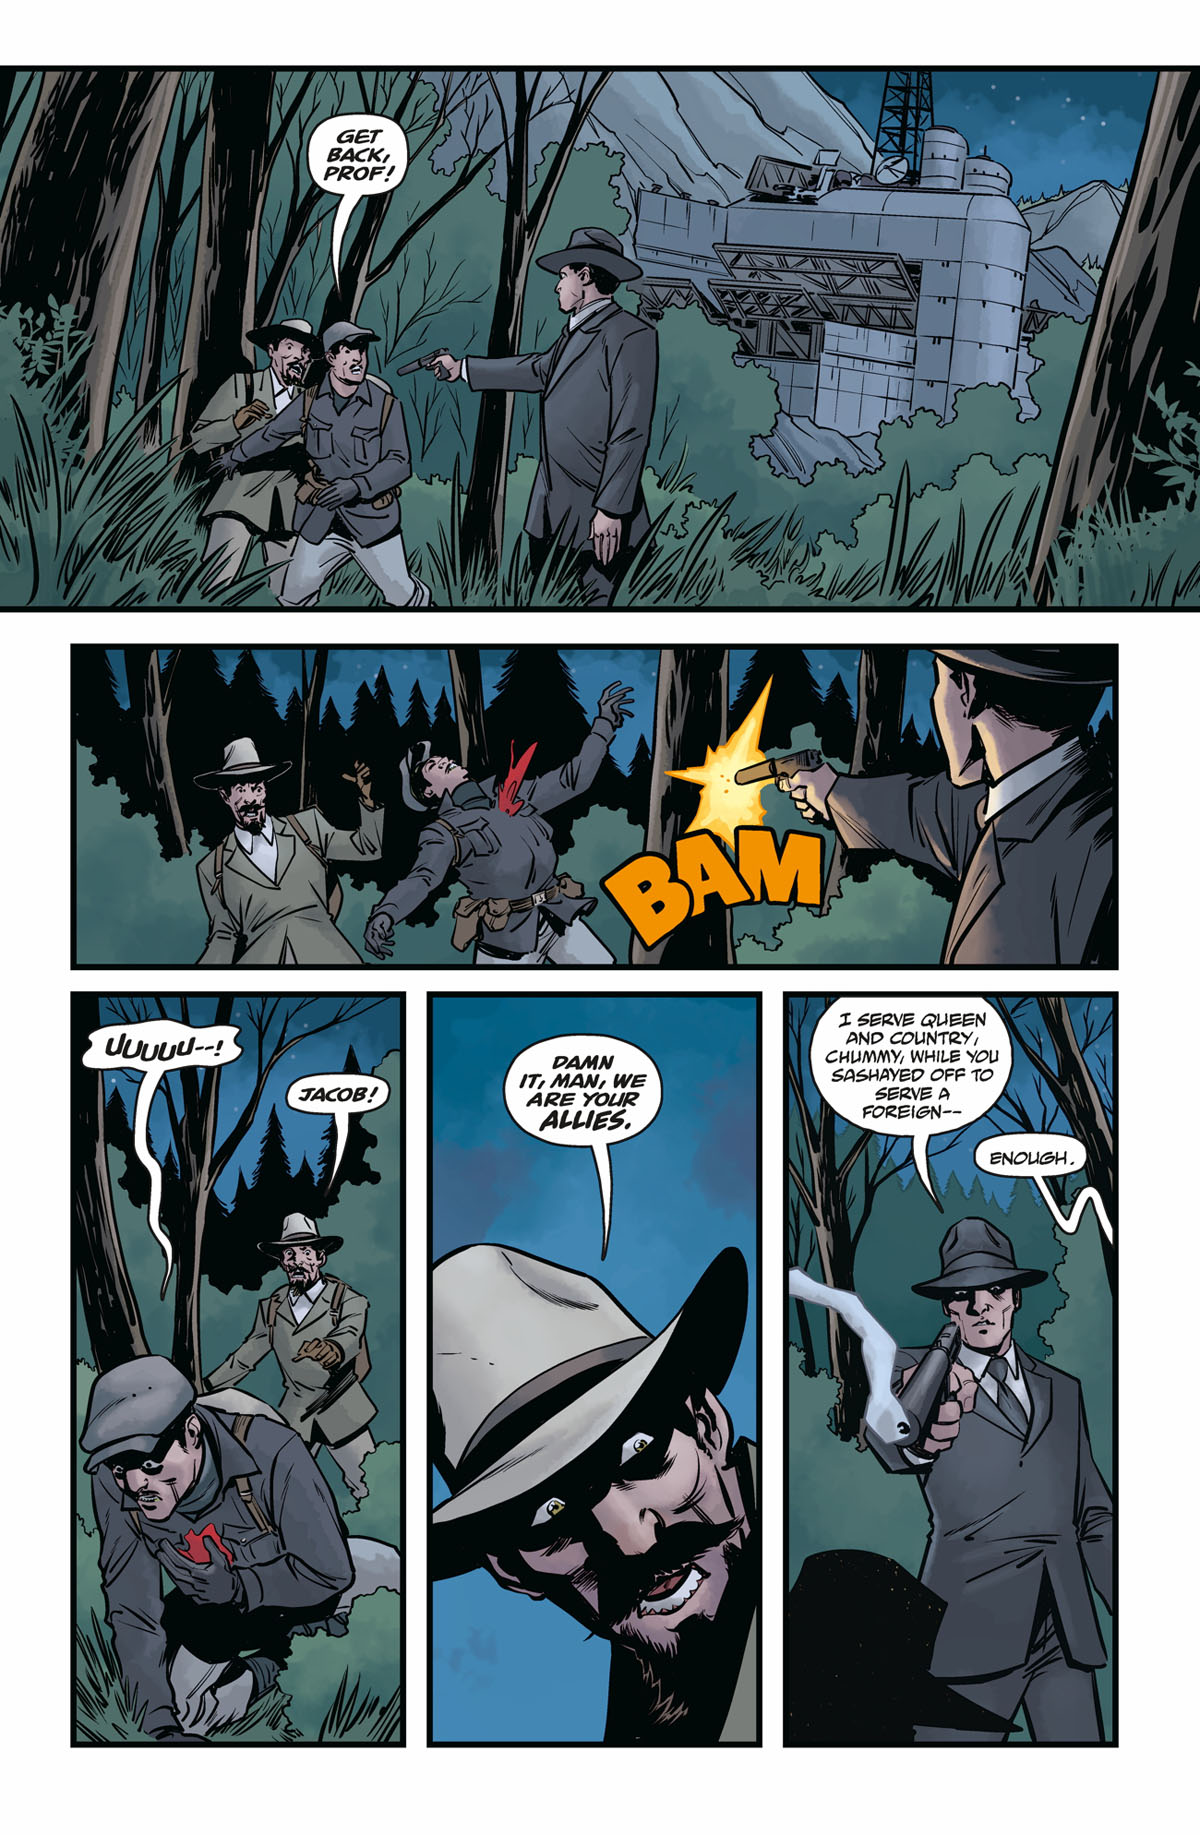 Hellboy and the BPRD 1956 #4 page 1